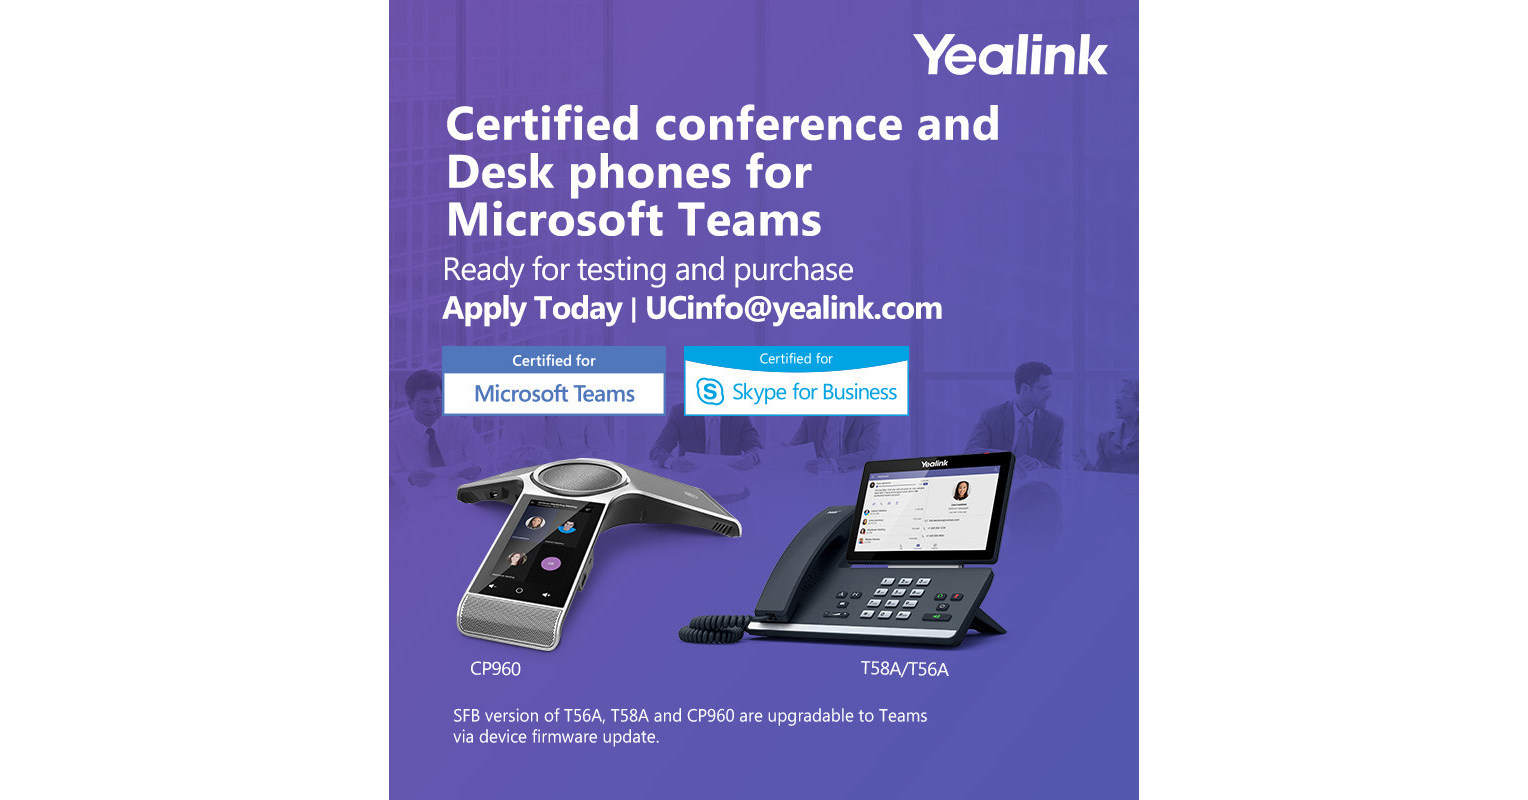 Yealink Announces New Conference And Desktop Phones Qualified For